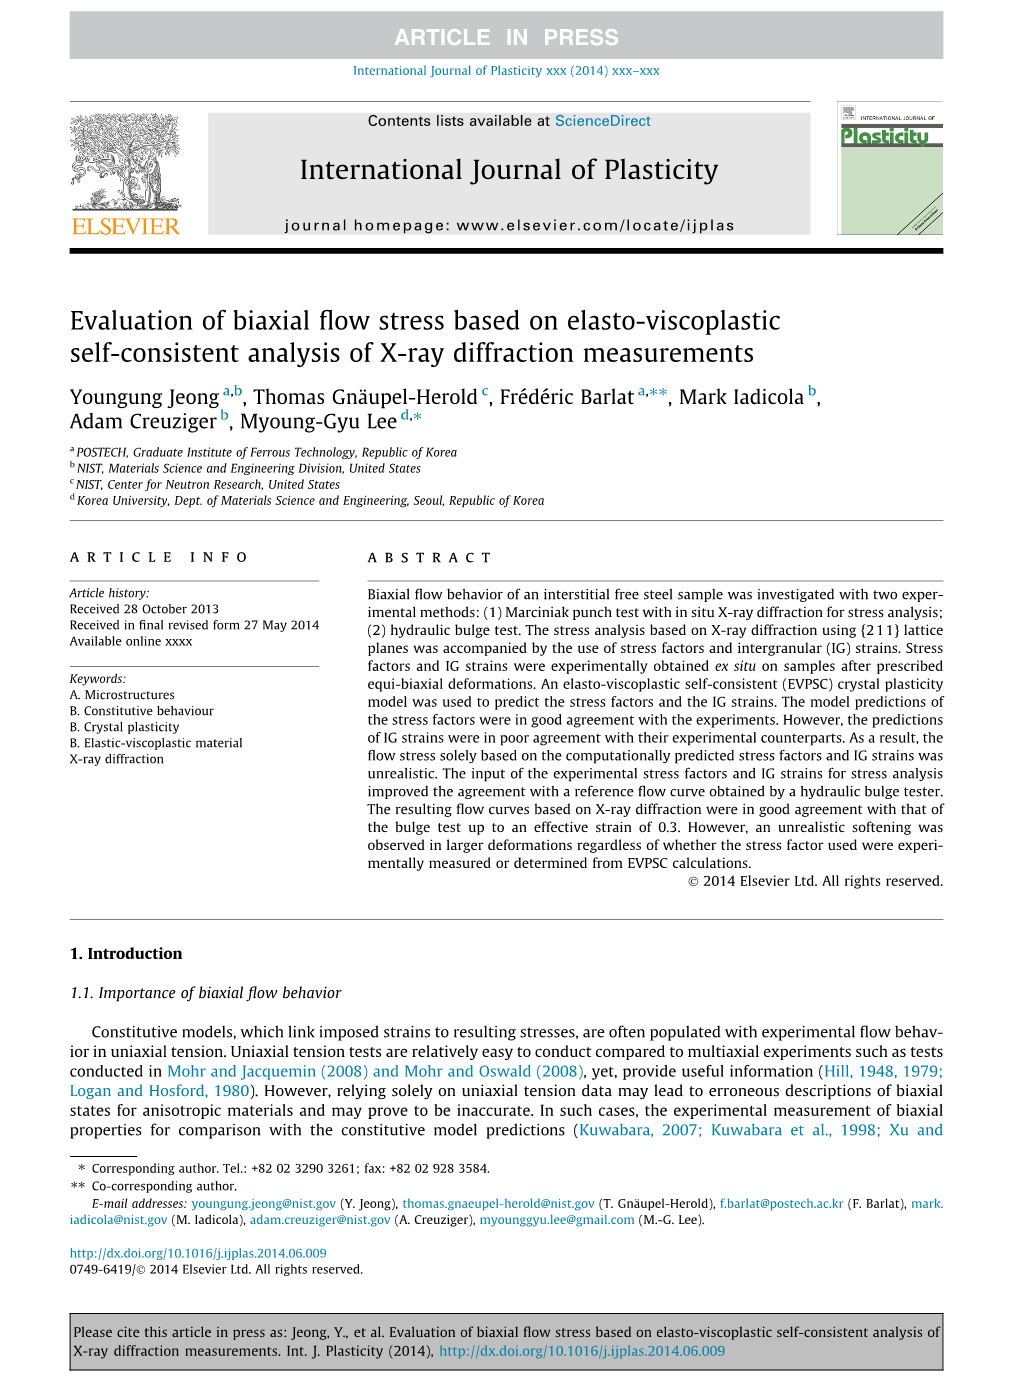 Evaluation of Biaxial Flow Stress Based on Elasto-Viscoplastic Self